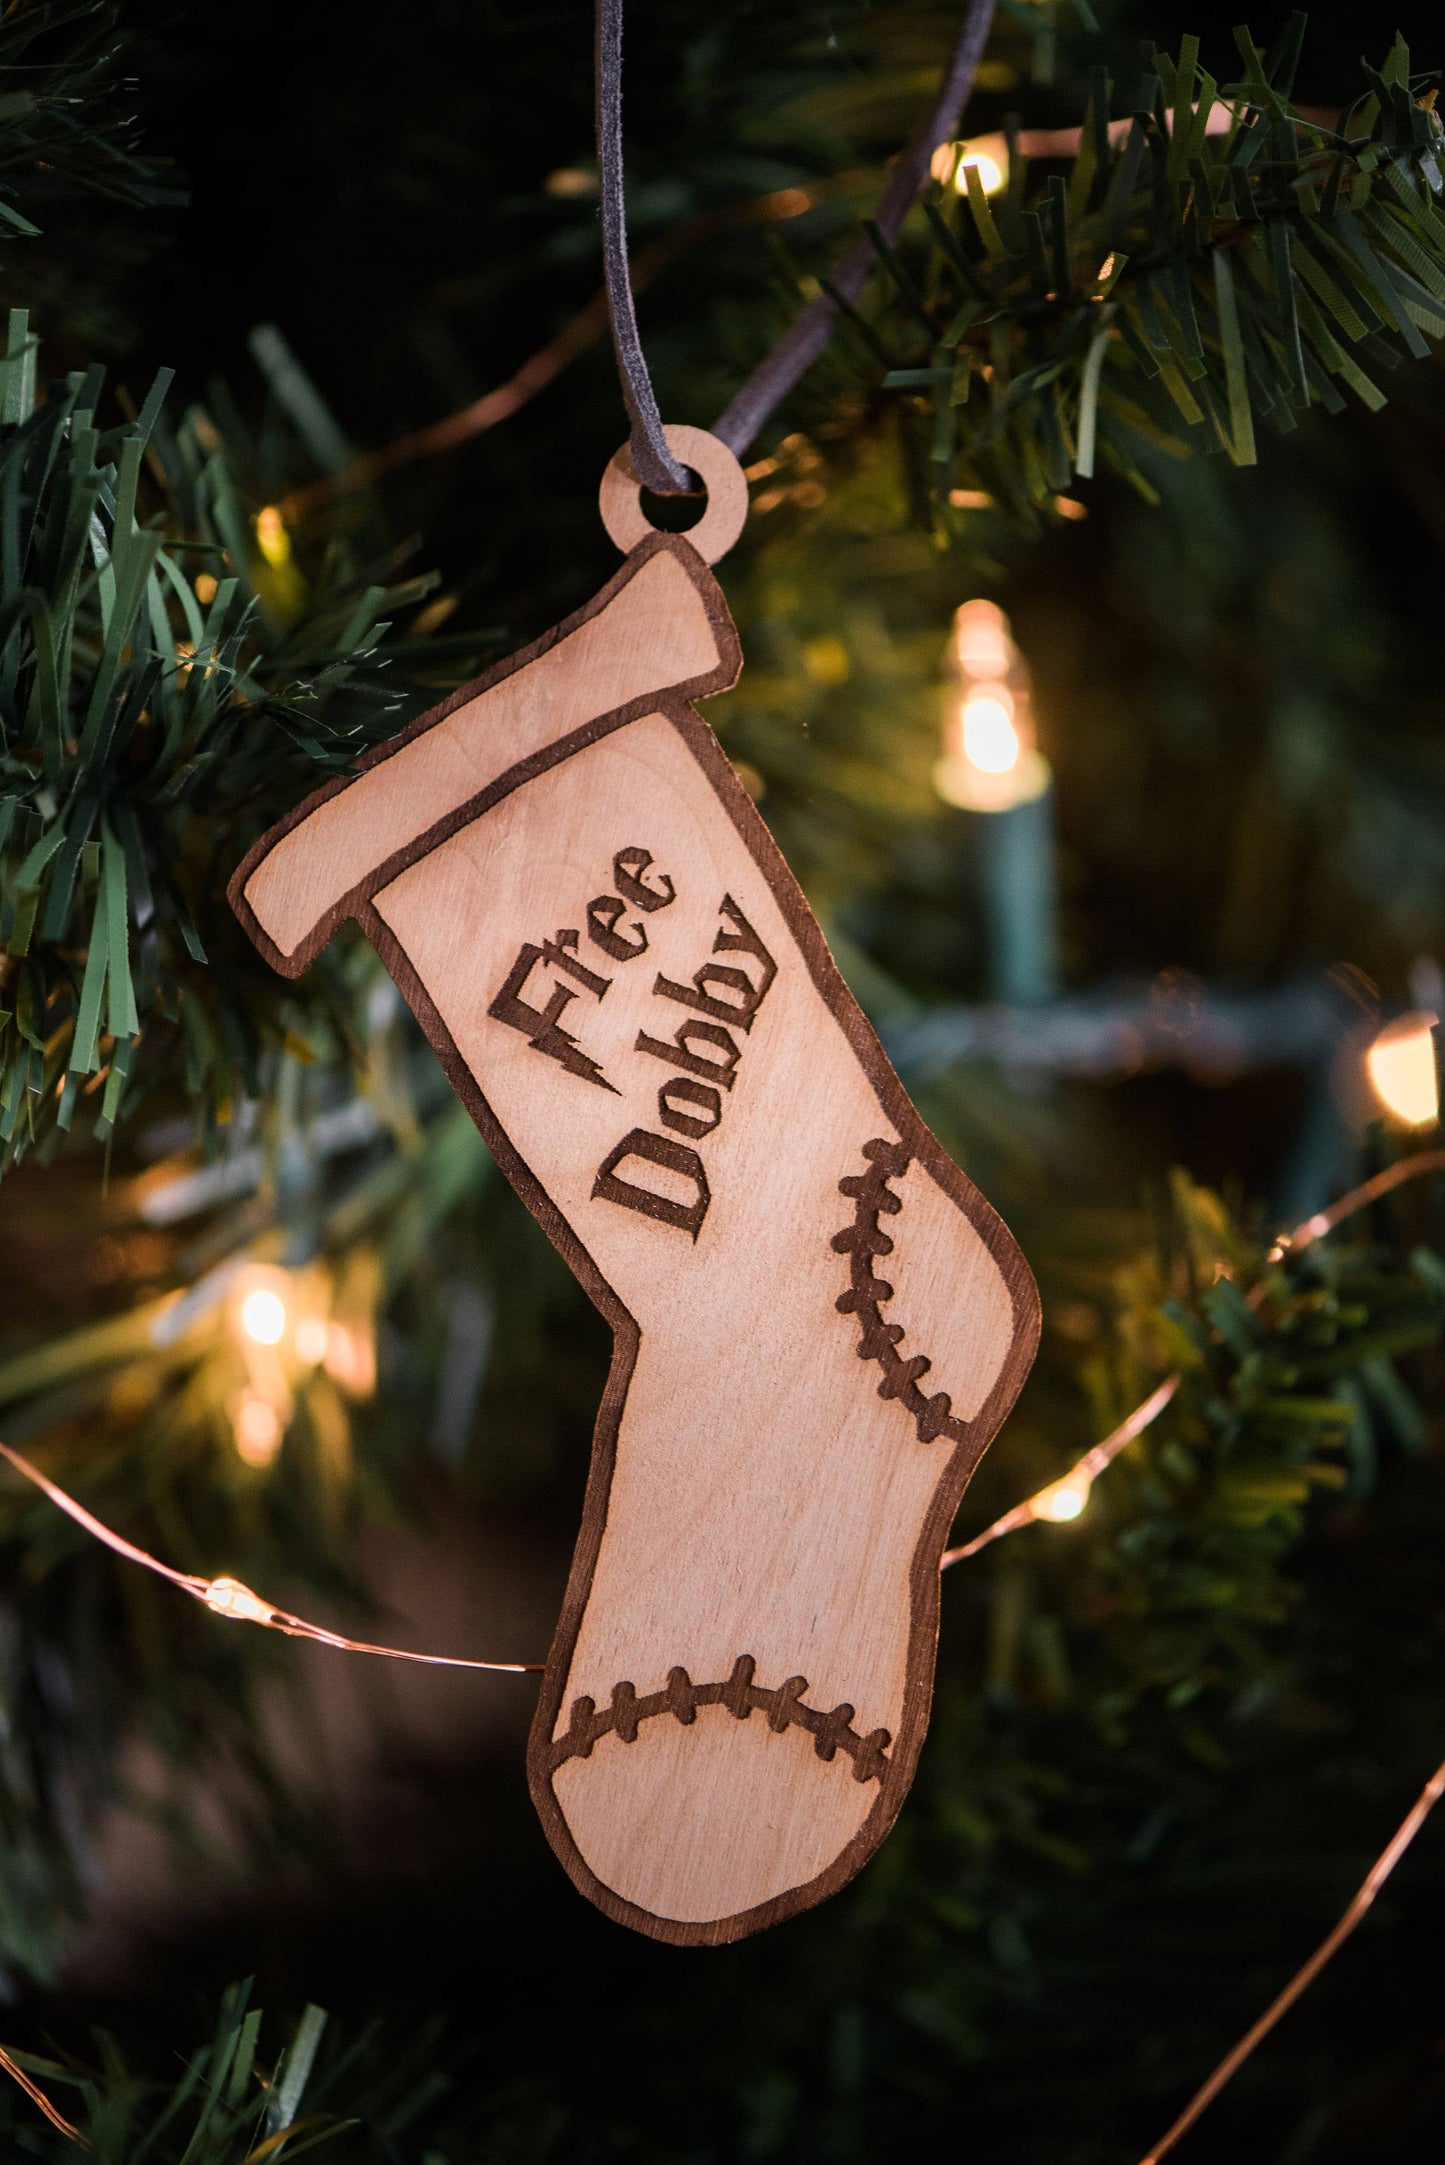 Free Dobby - Harry Potter Inspired Wooden Ornament